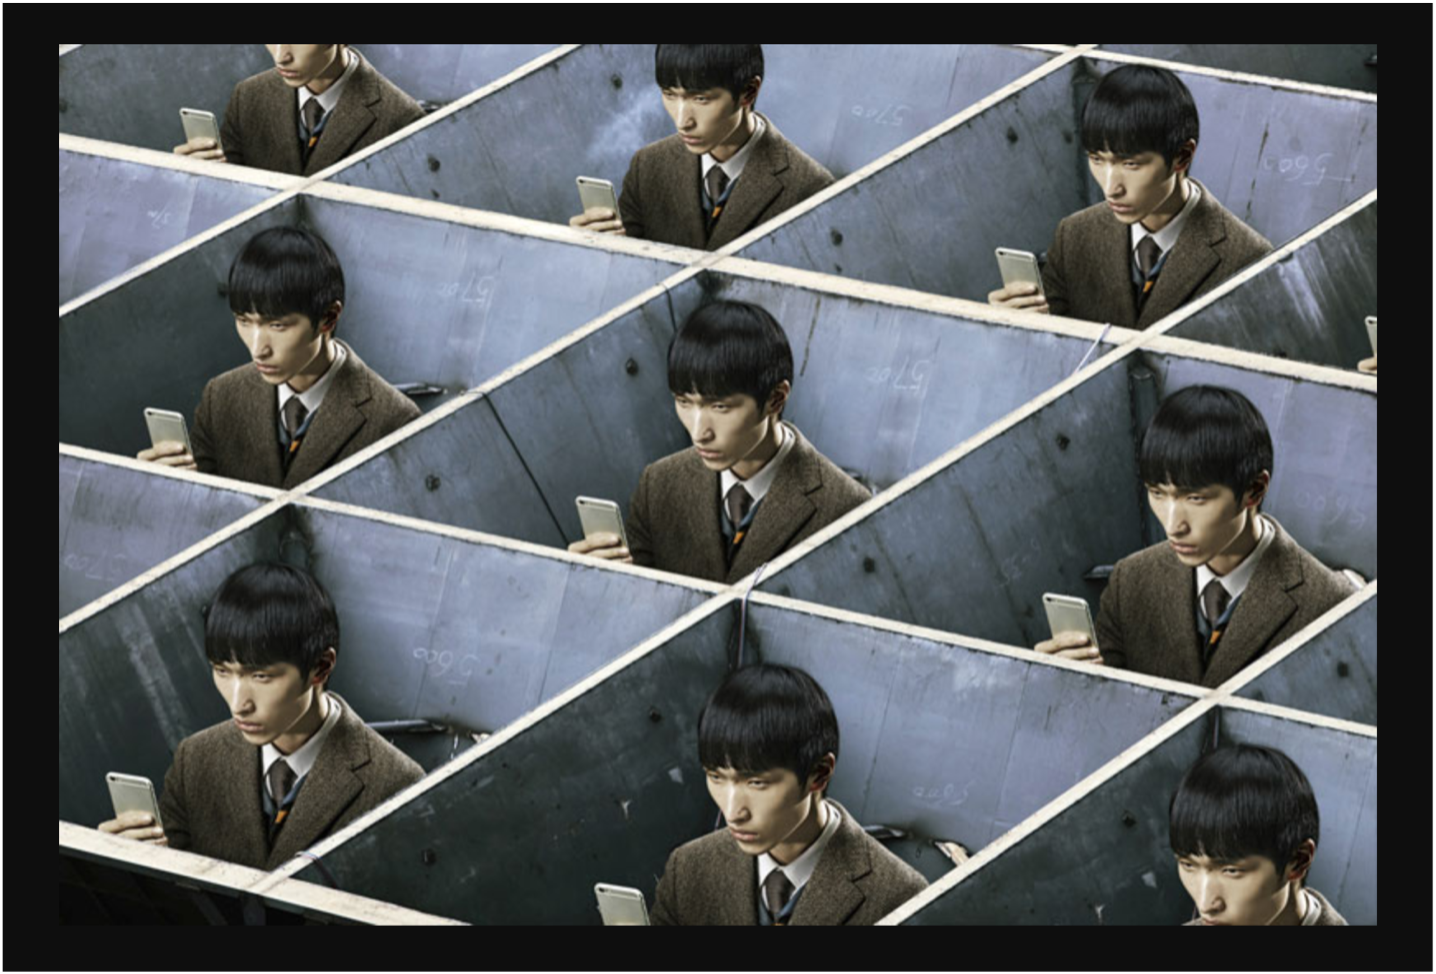 Alt/Text: A young Japanese man with black hair and a bowl cut, sitting in a work cubicle, looking at his smart phone. The image of the same young man is repeated in cubicles all around; see seven cubical/squares and at least two half/squares.